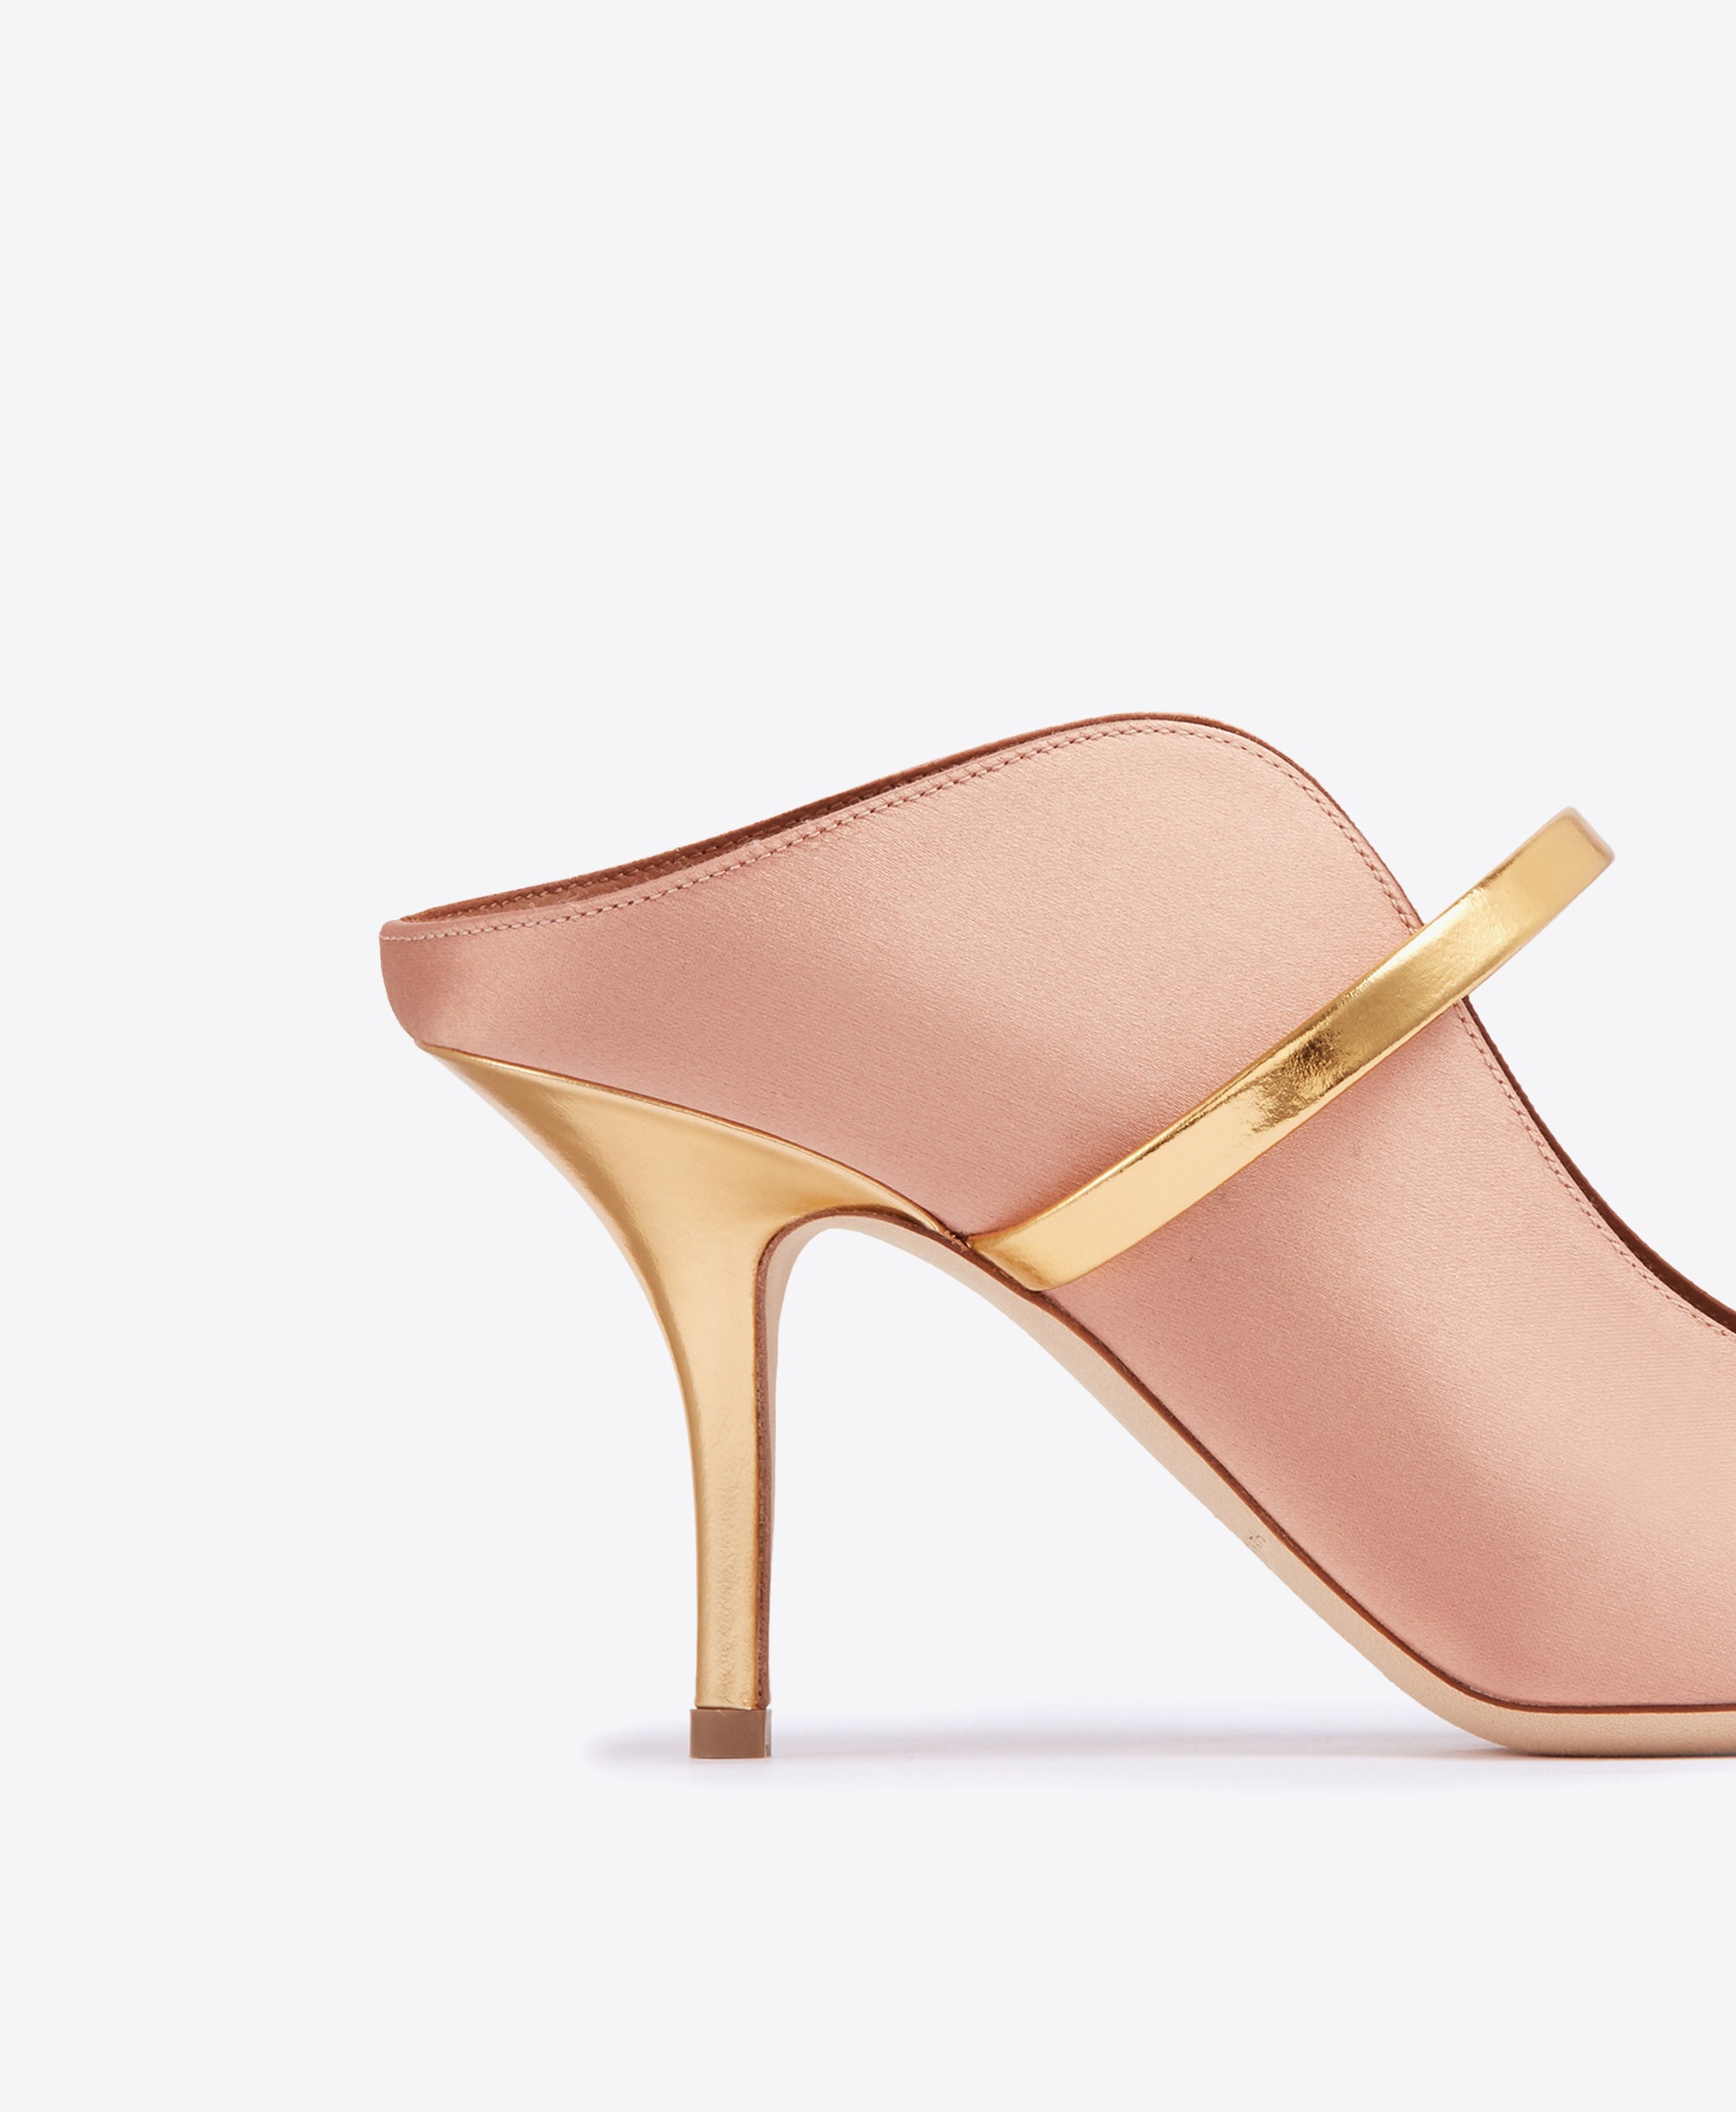 Malone Souliers Satin Blush Pink Heeled Mules with Signature Gold Leather Straps